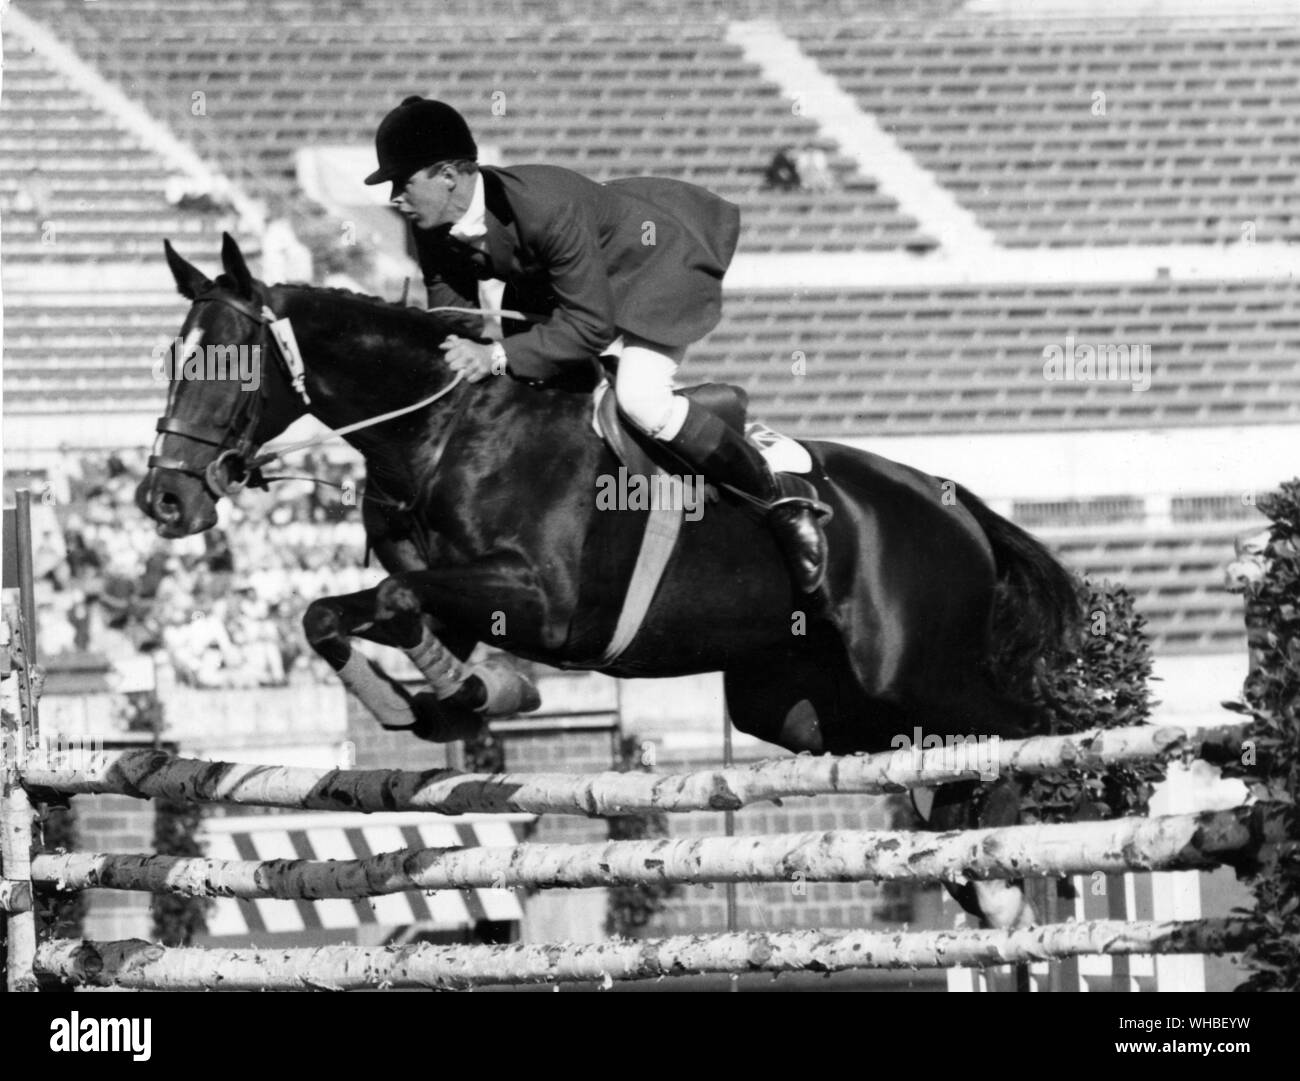 David Barker riding Franco during the Grand Prix Eventing of the Olympic Games in the Olympic Stadium Rome Stock Photo